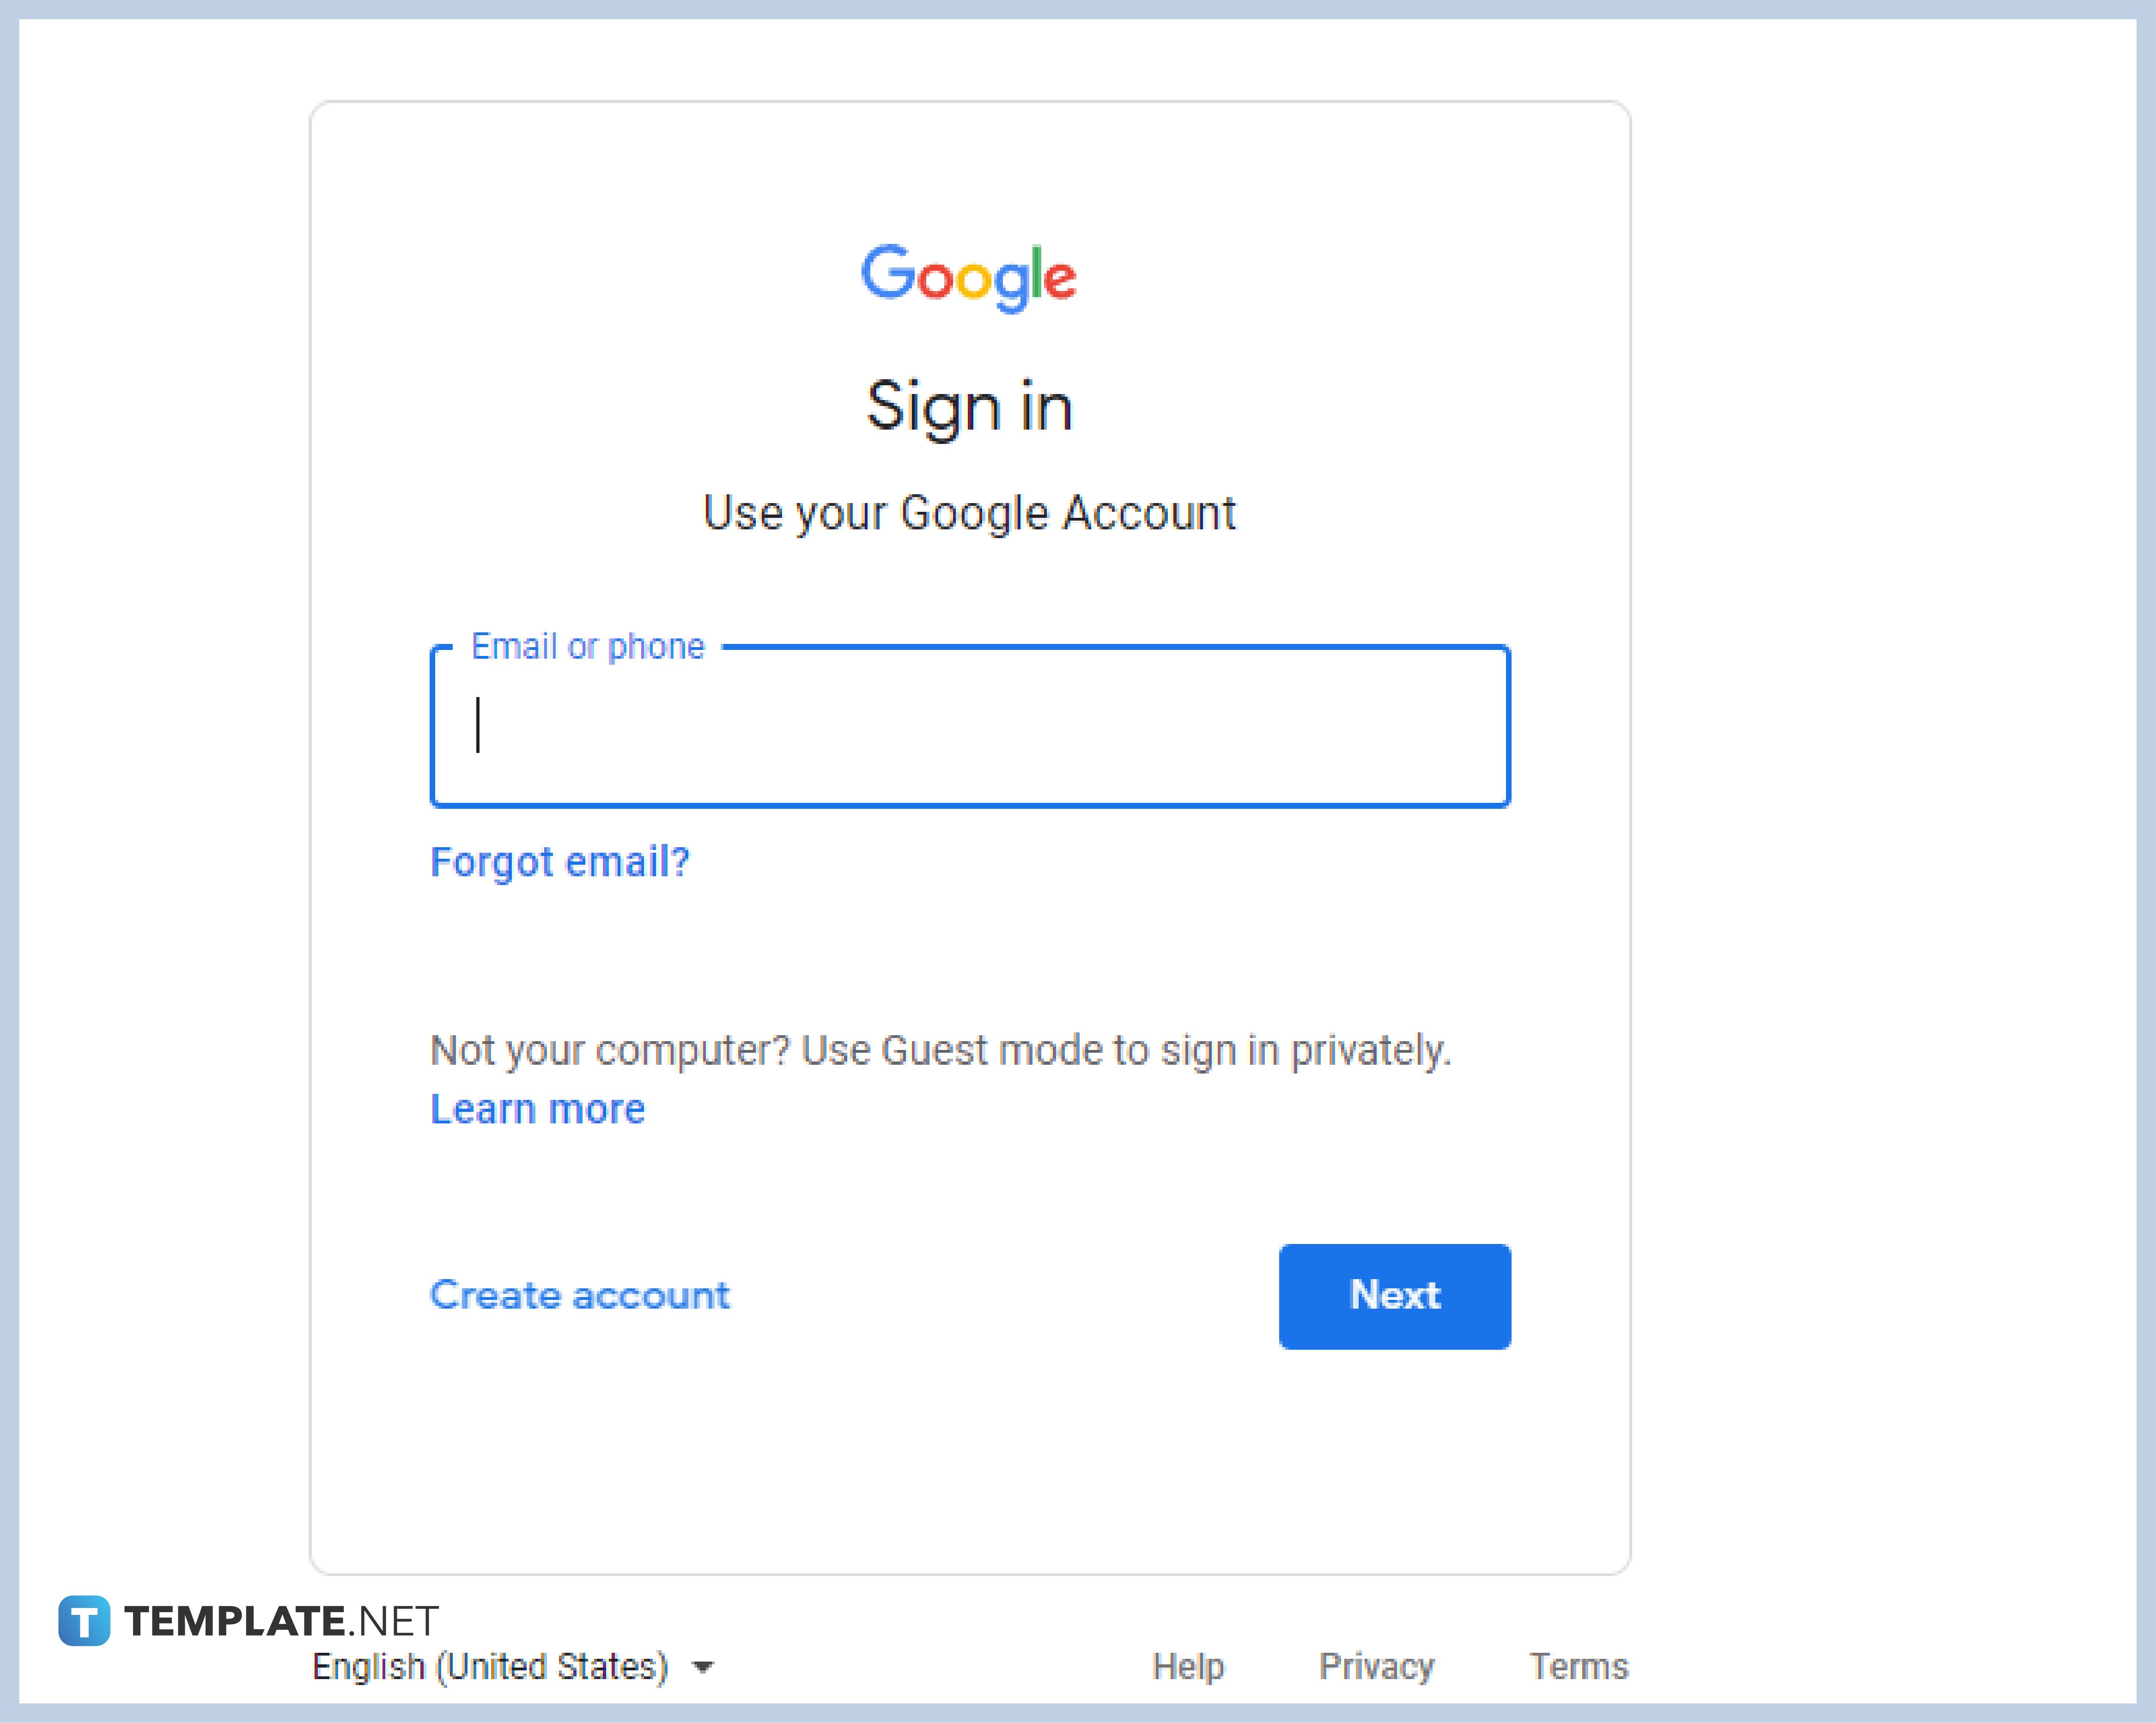 step-1-sign-in-with-your-account-0119